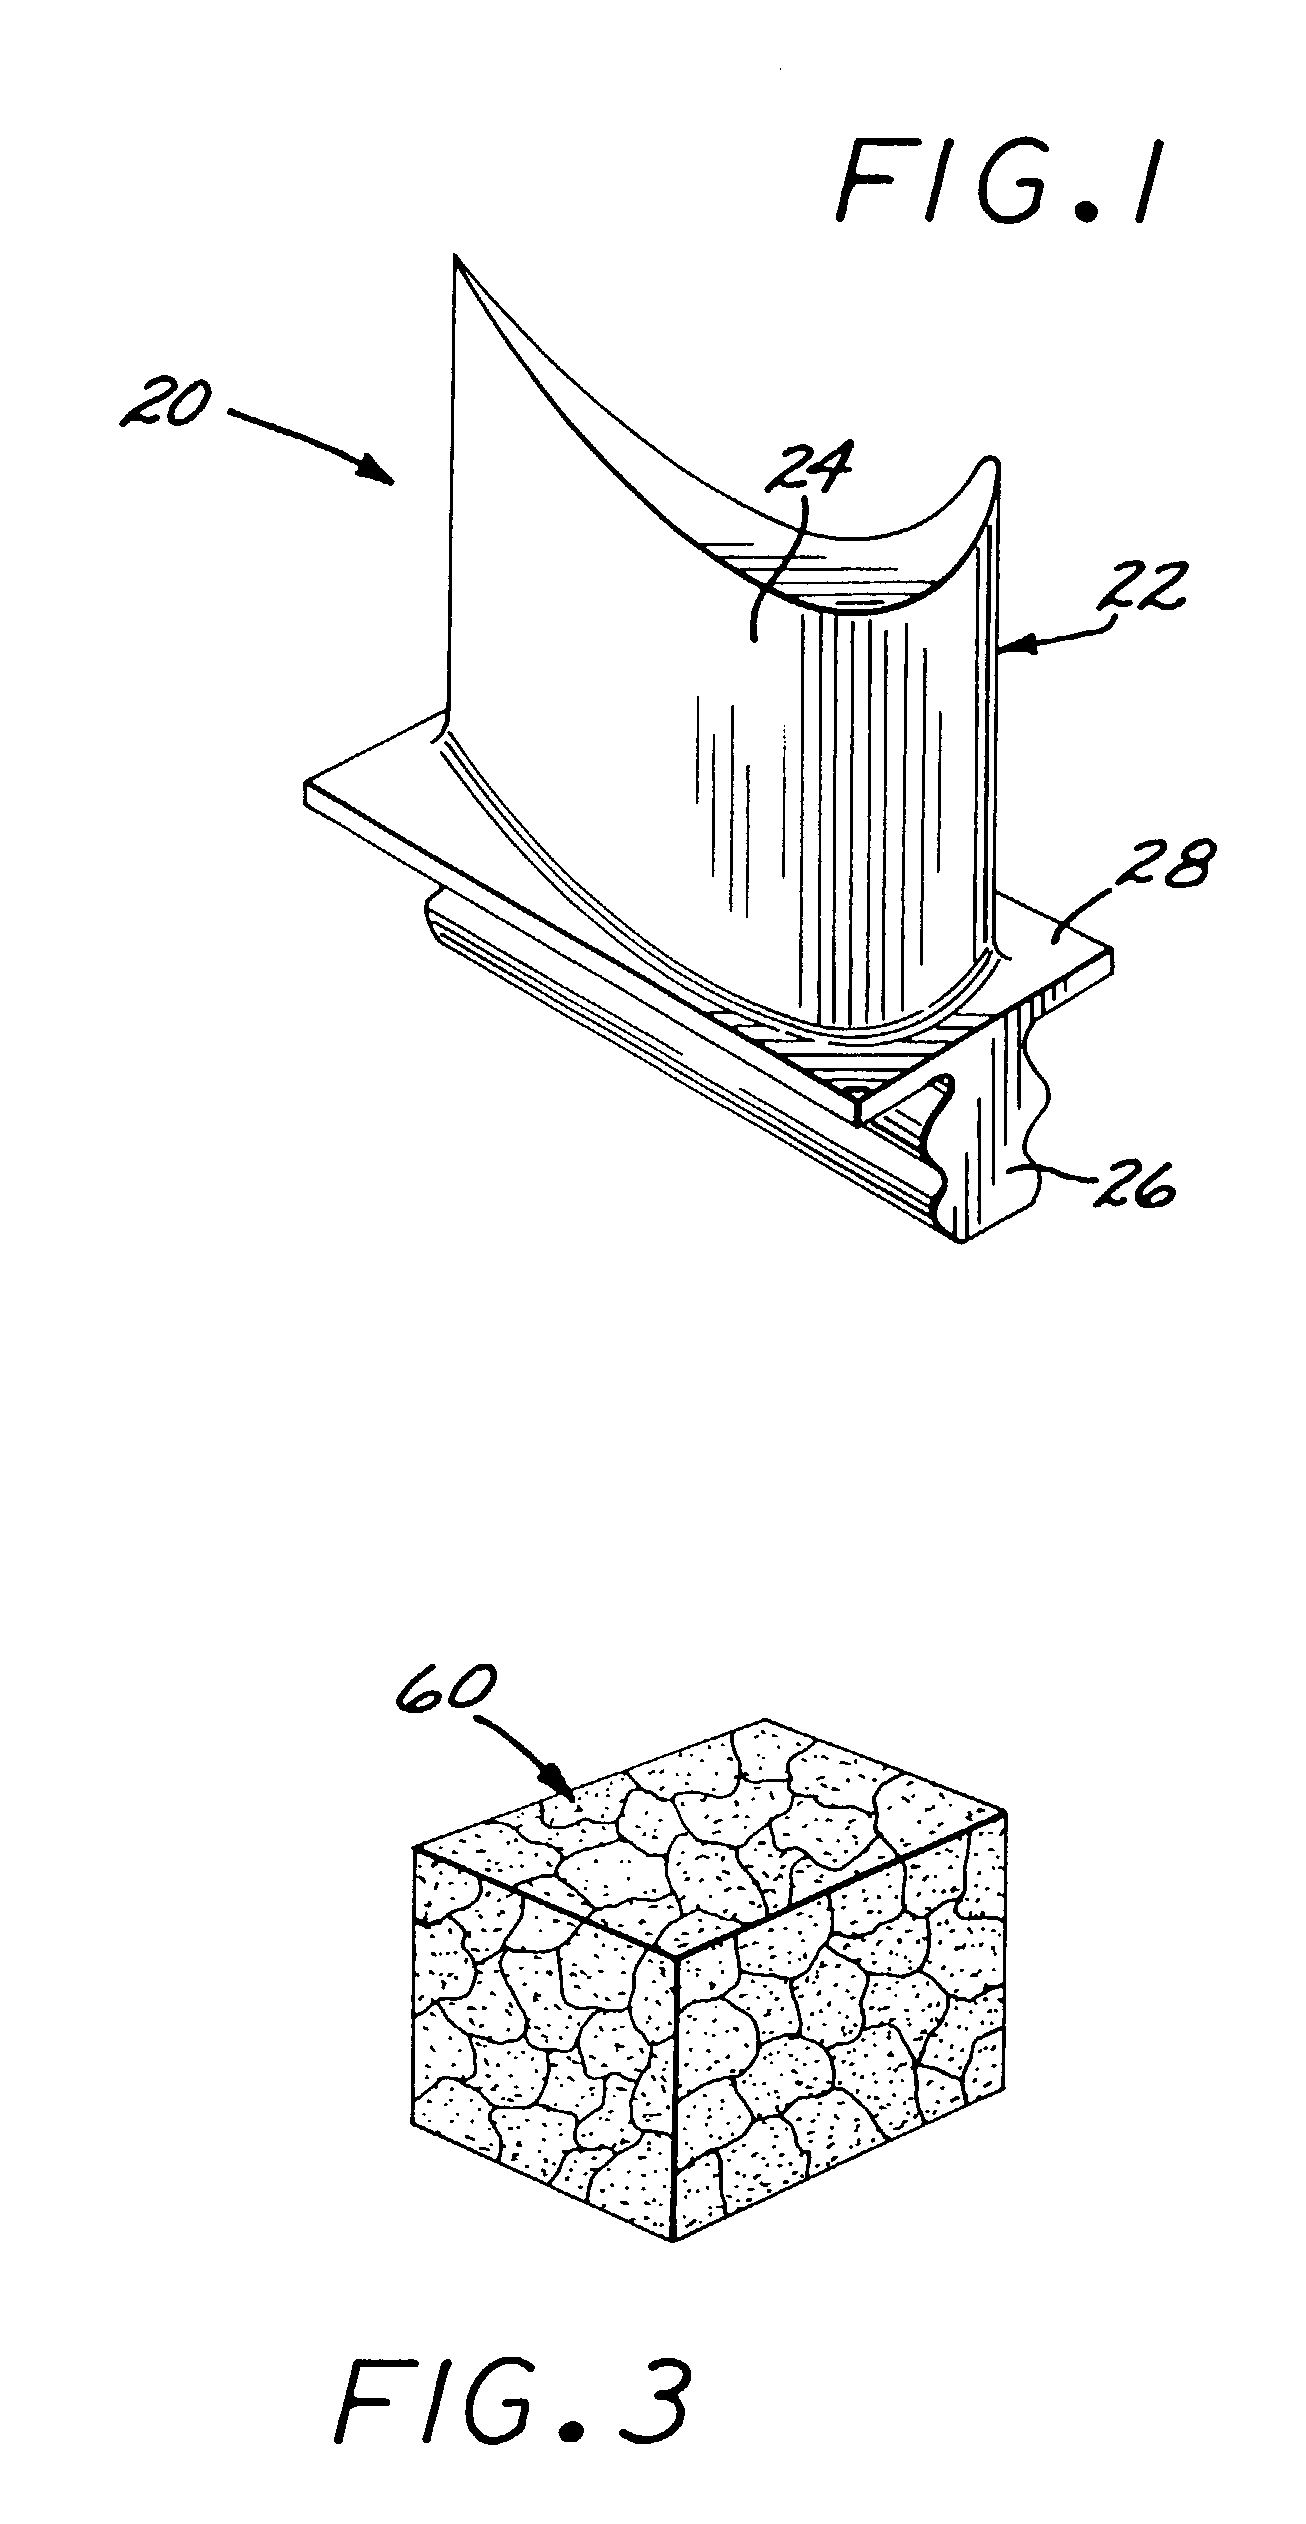 Method for fabricating a superalloy article without any melting